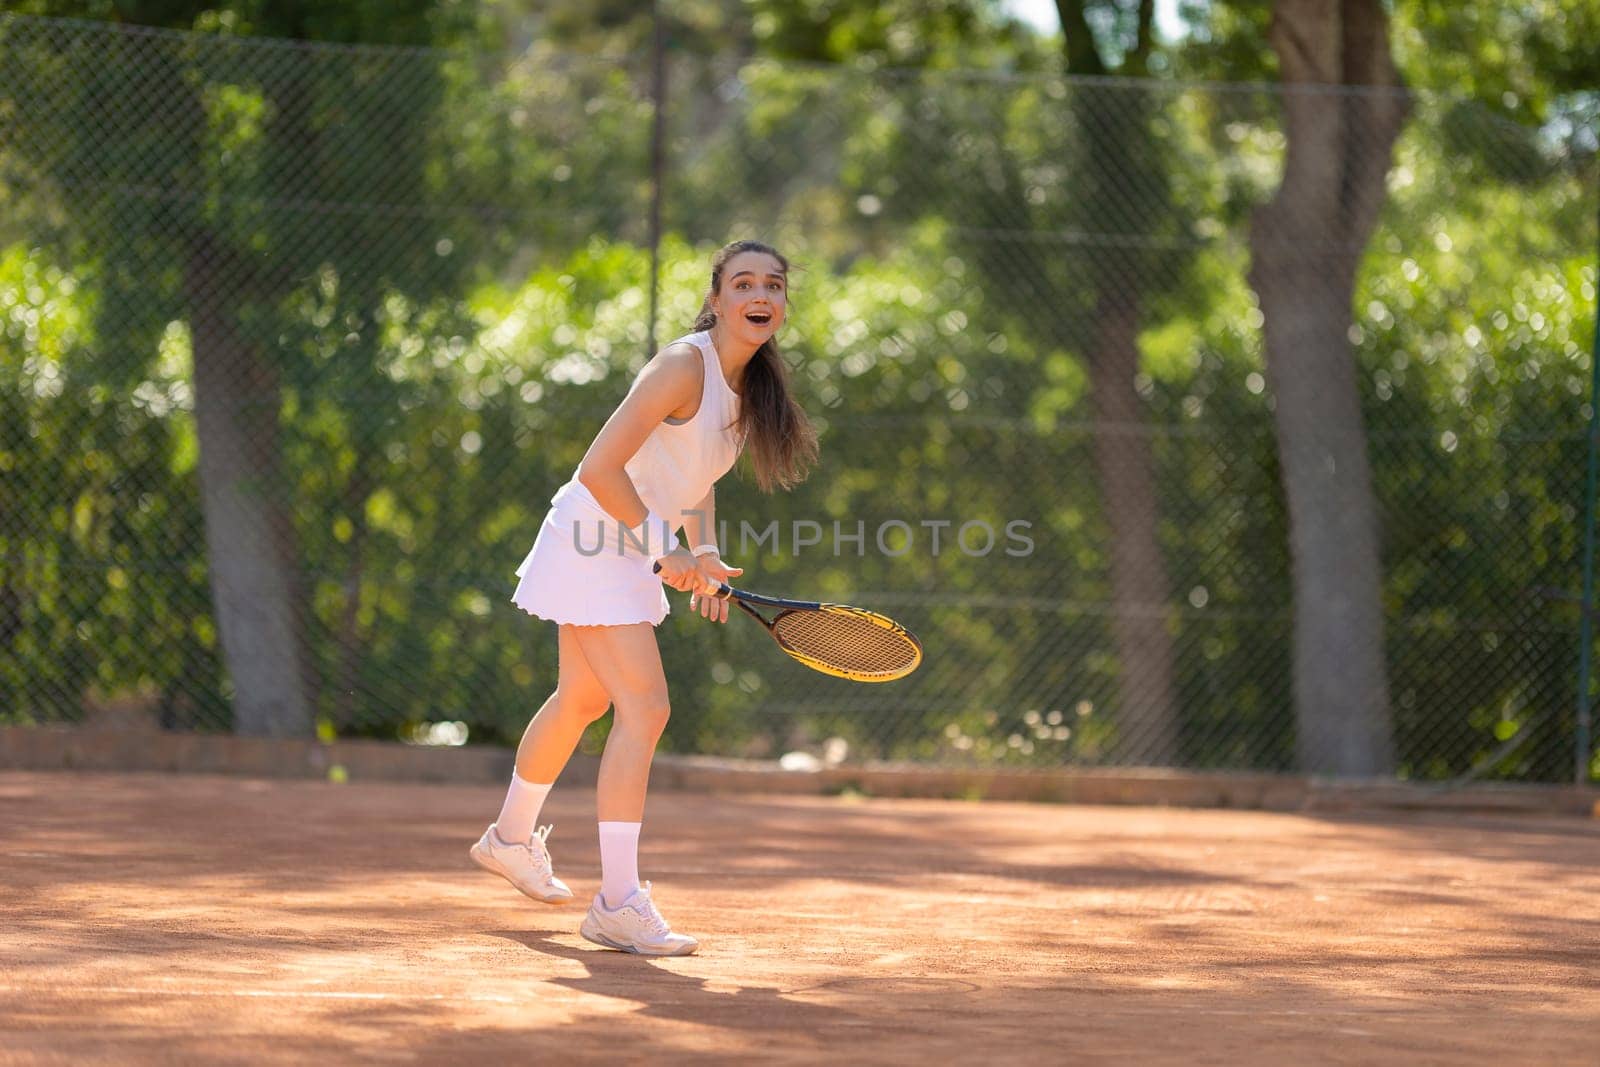 A woman is playing tennis on a clay court. She is wearing a white skirt and a white top